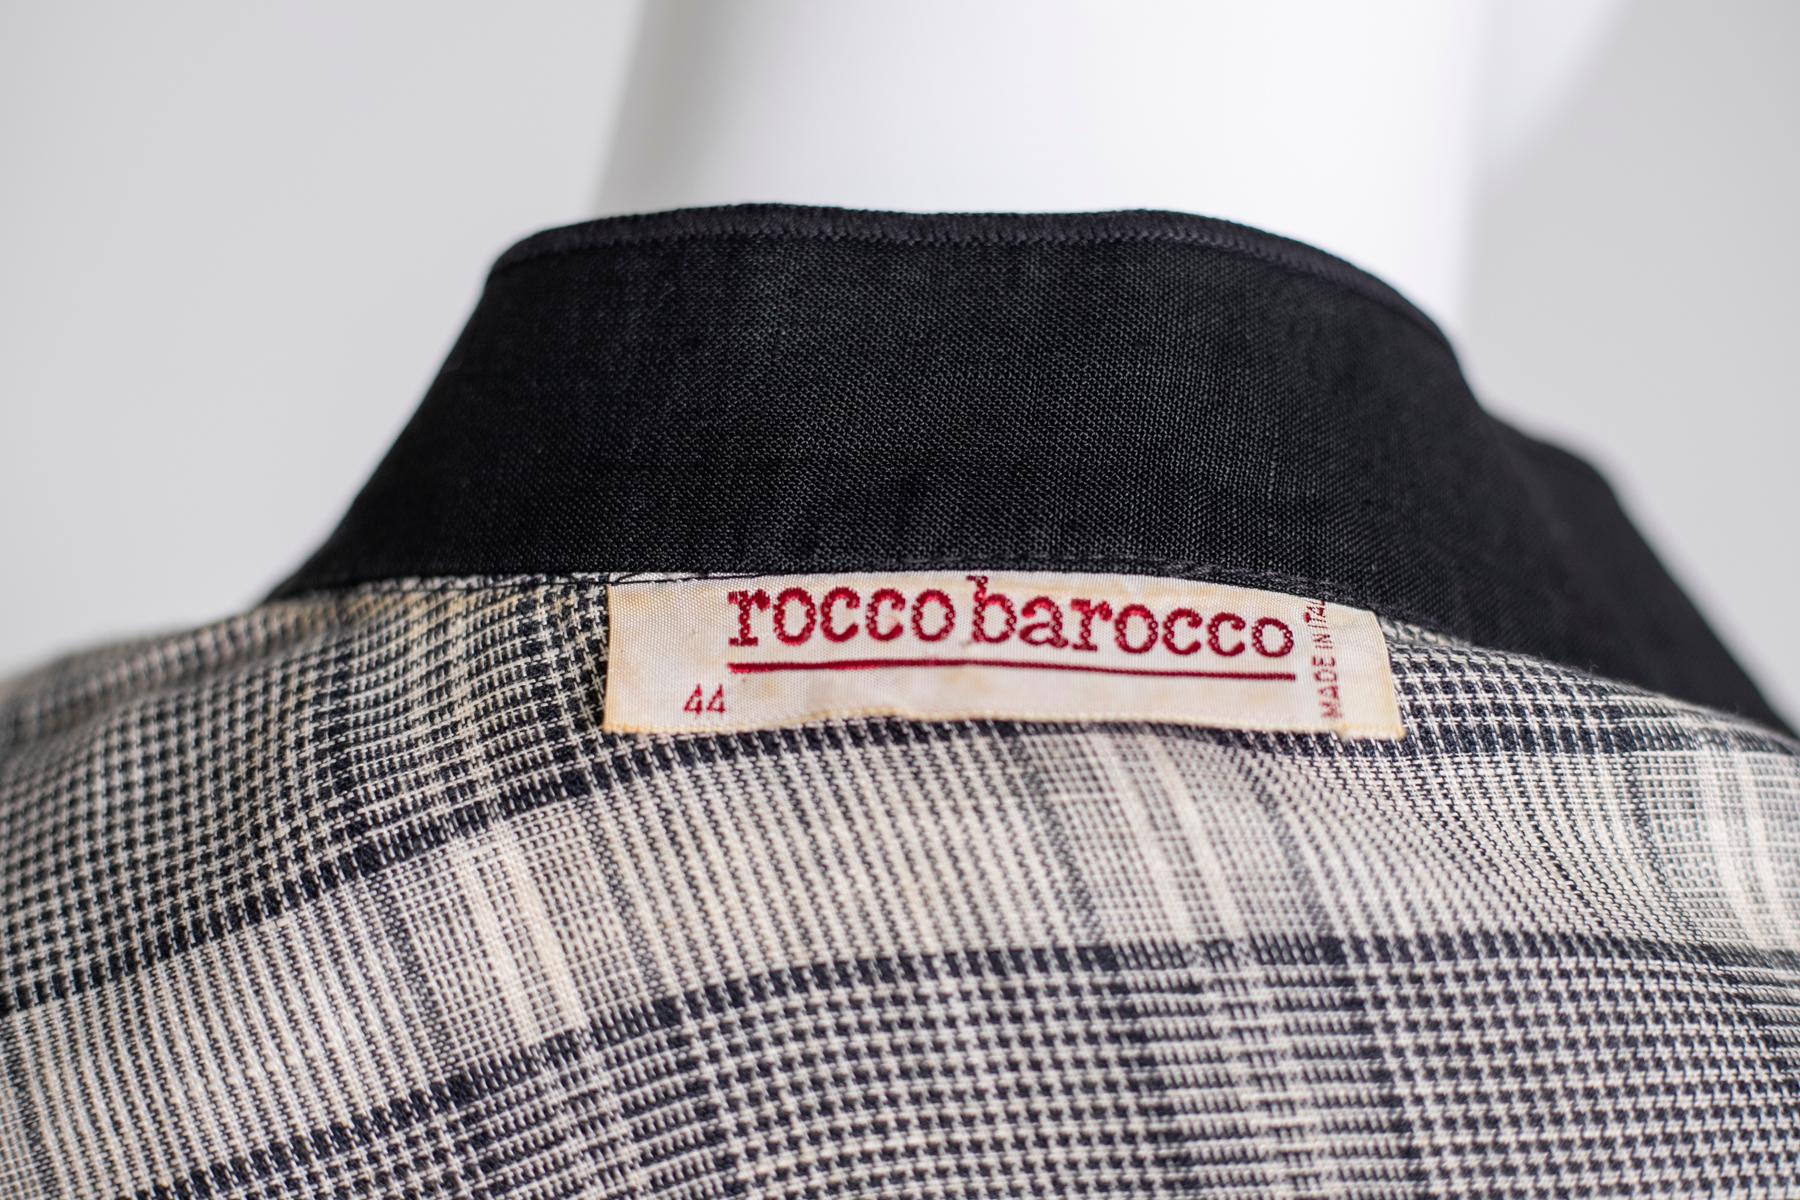 Gorgeous cotton shirt designed by Rocco Barocco in the 90s, made in Italy.
ORIGINAL LABEL.
The shirt is totally made of cotton, very elegant. It has a standard collar, which connects to the center of the blouse, made up of 6 beautiful round pearl